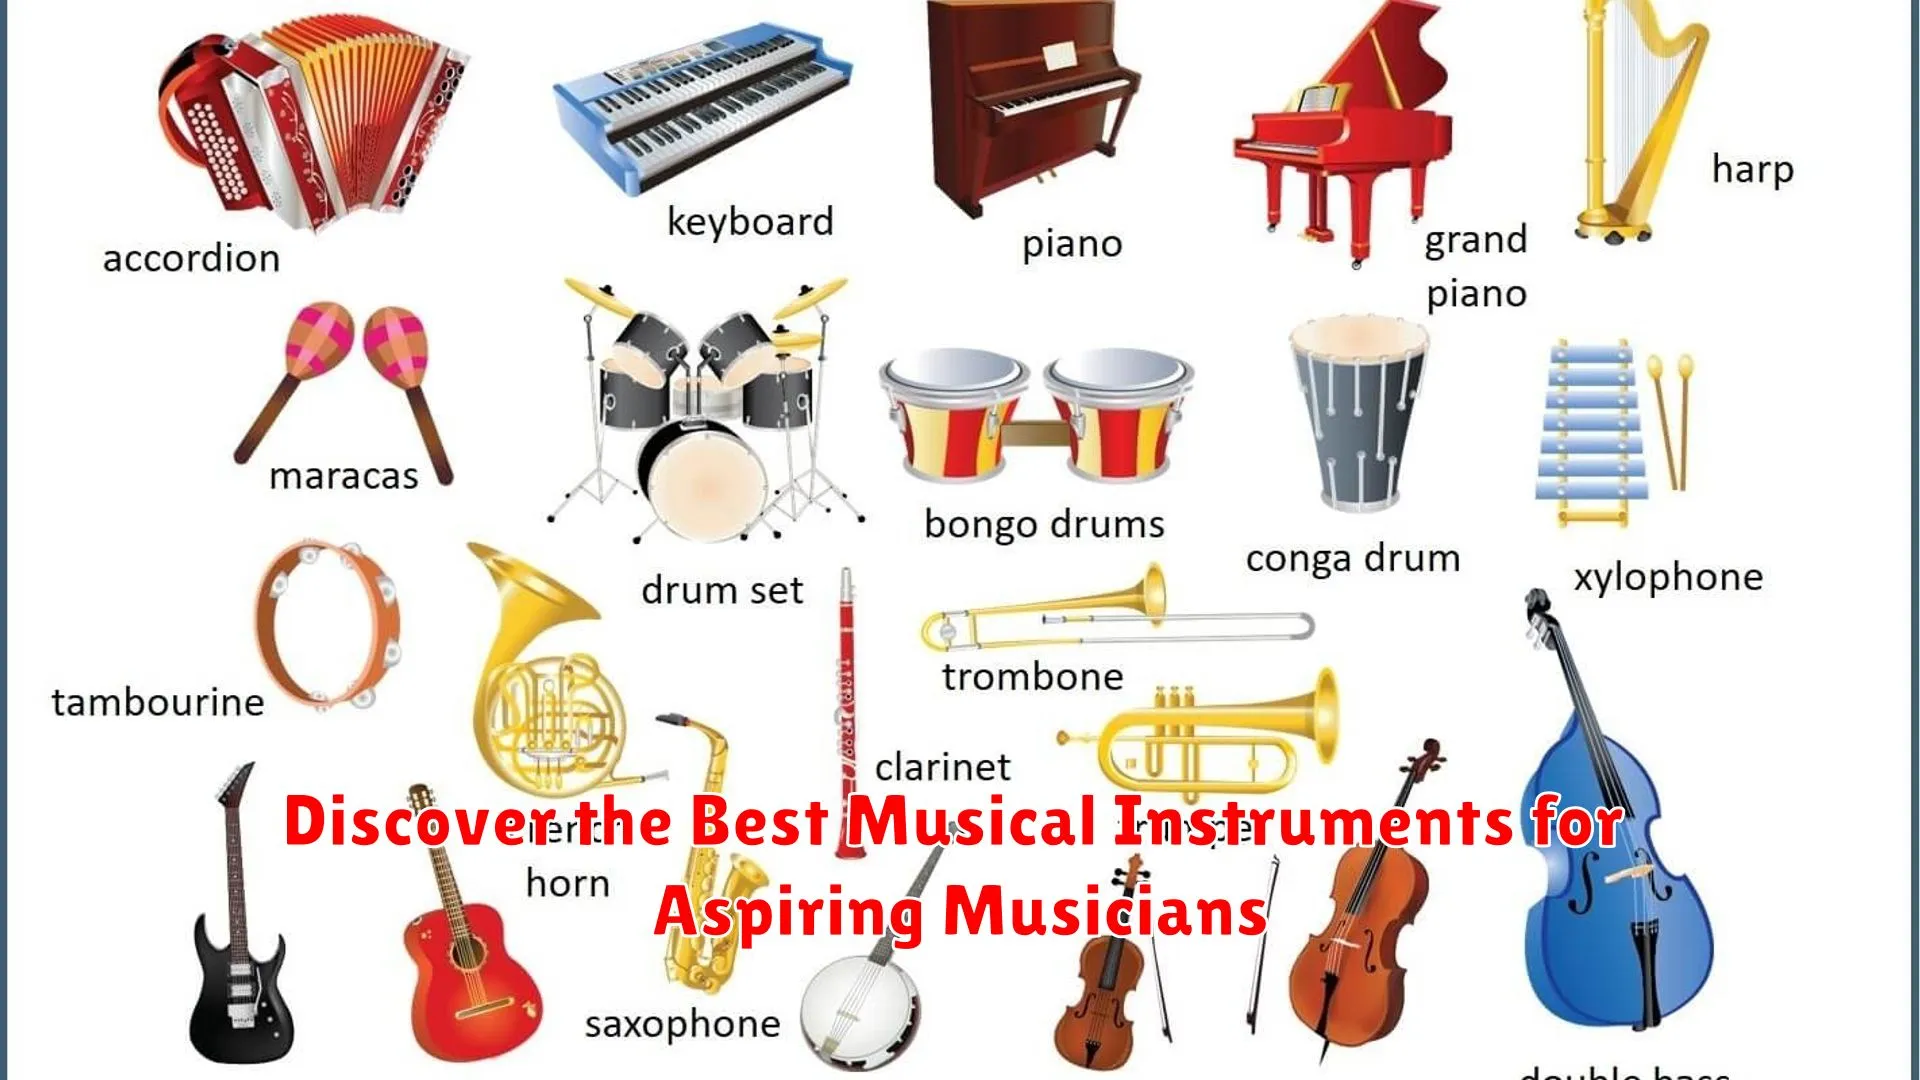 Discover the Best Musical Instruments for Aspiring Musicians